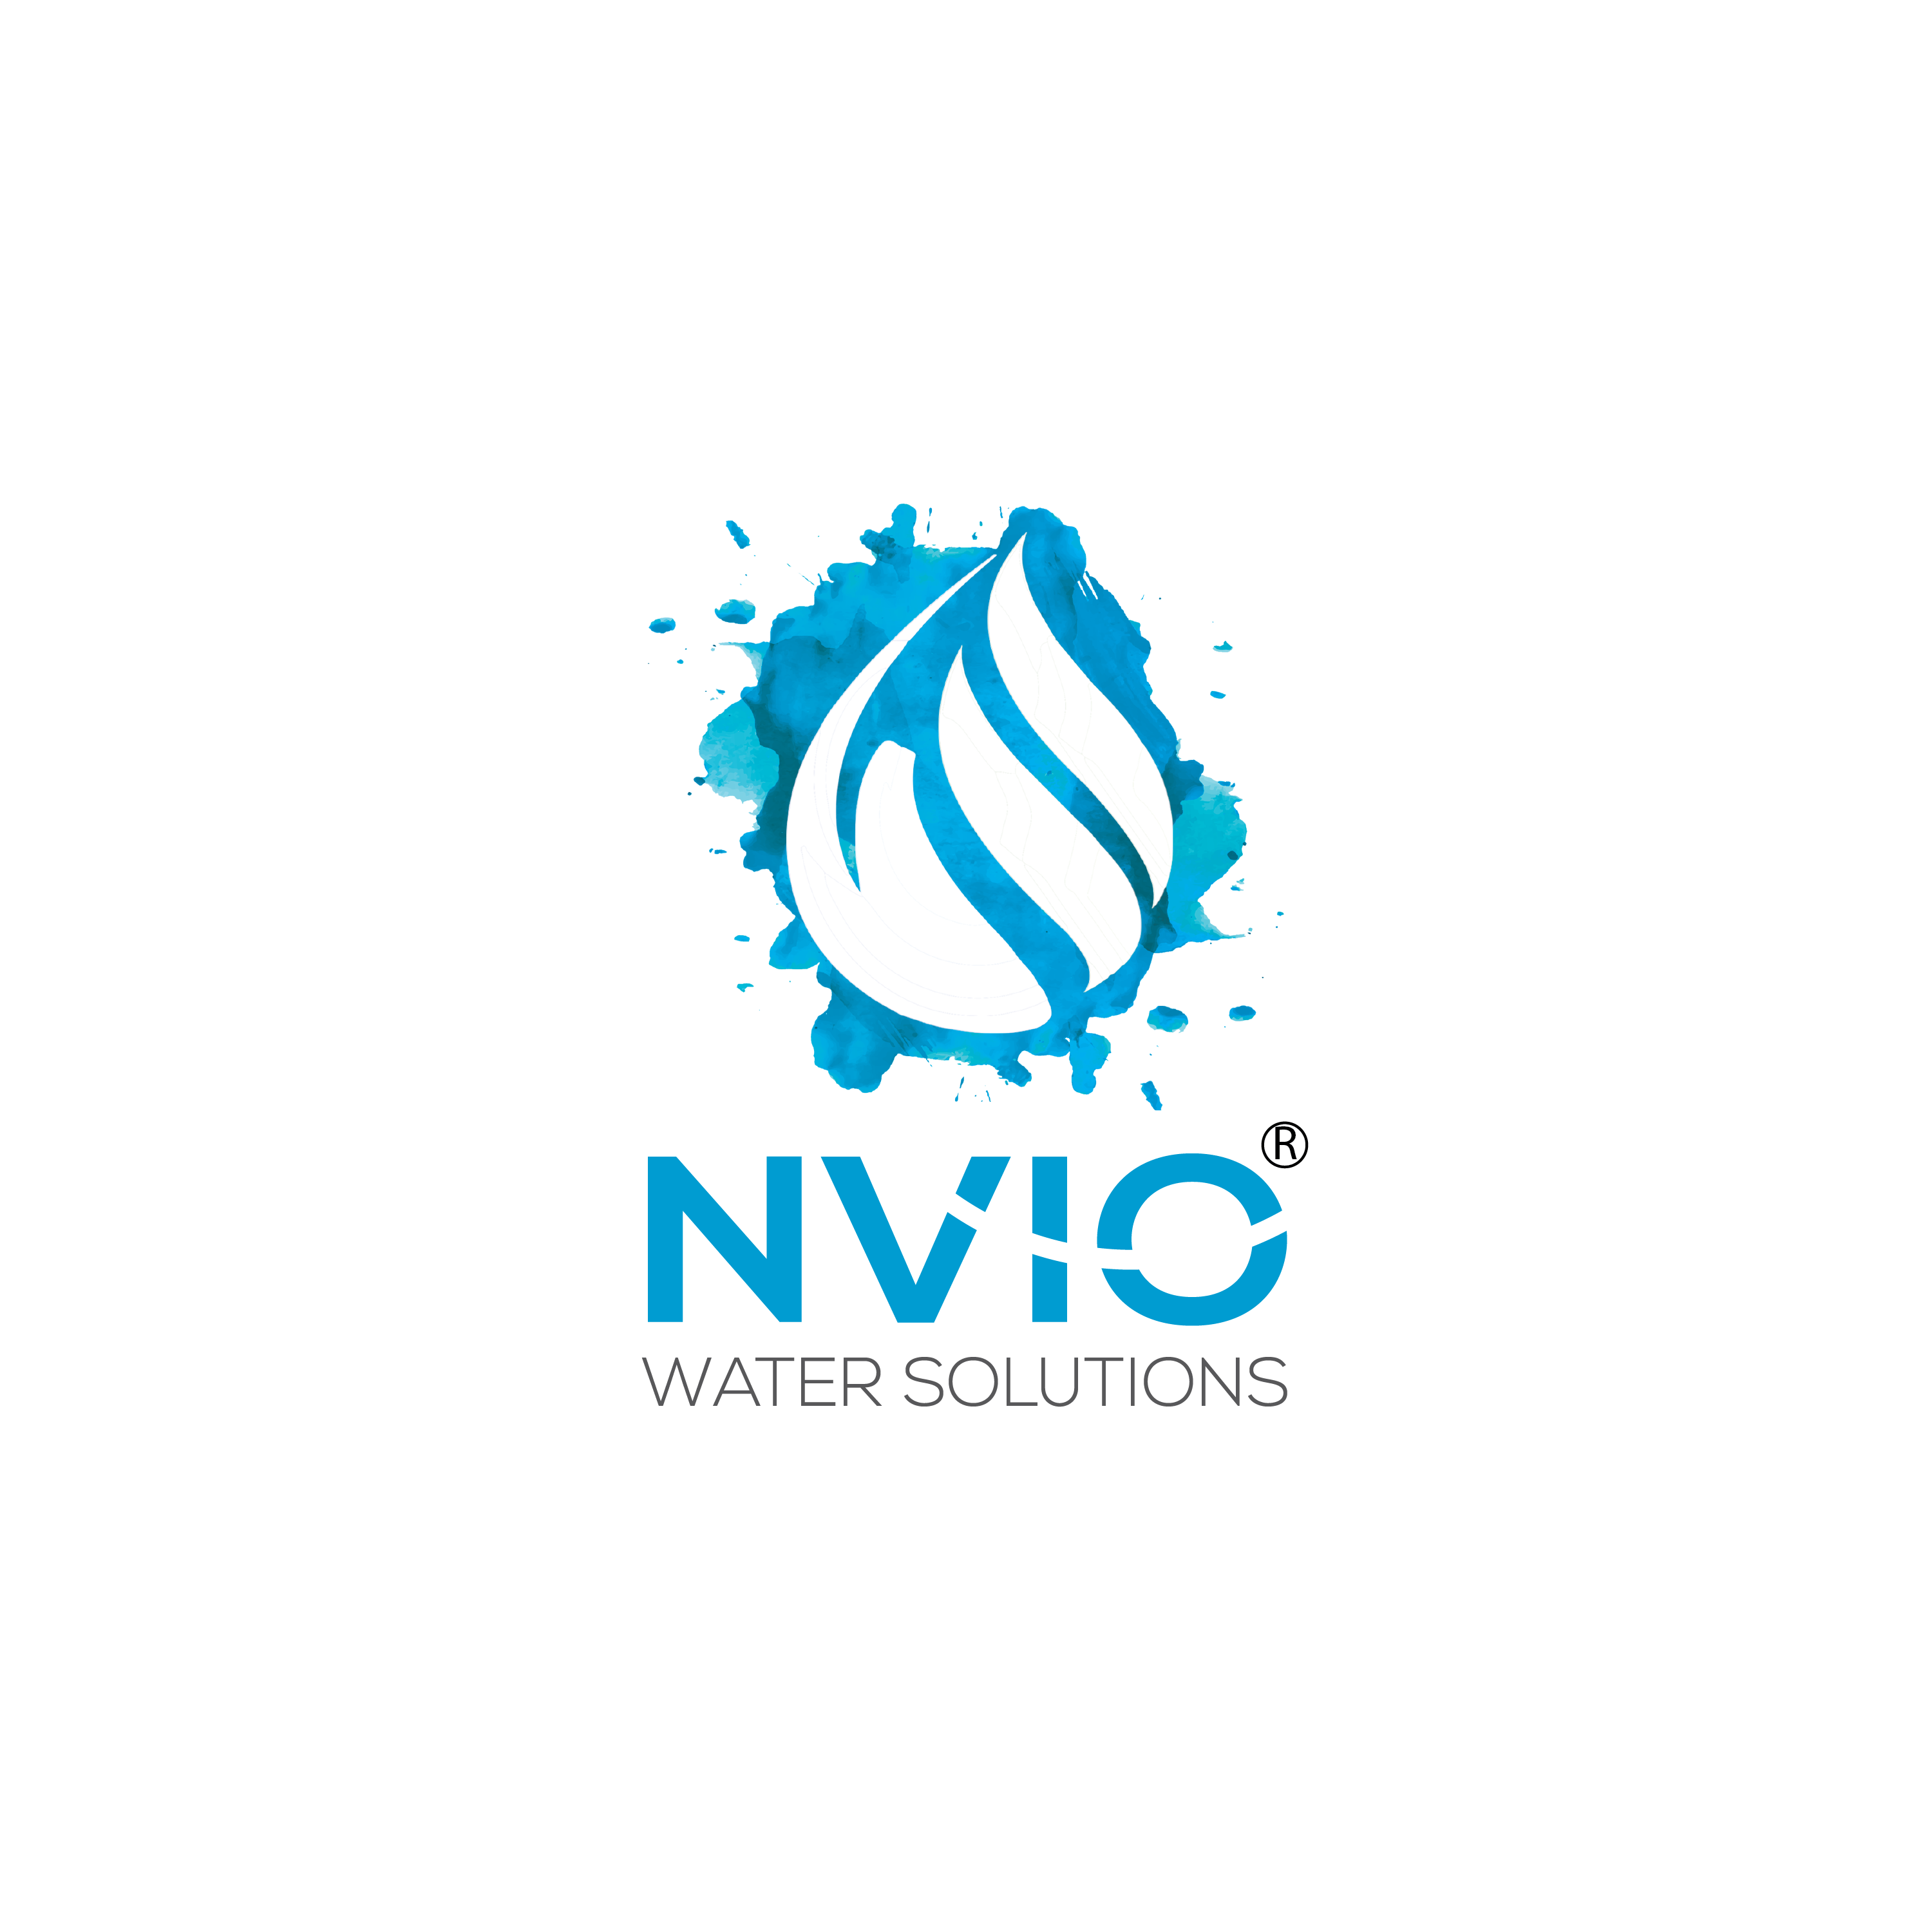 NVIO Solutions